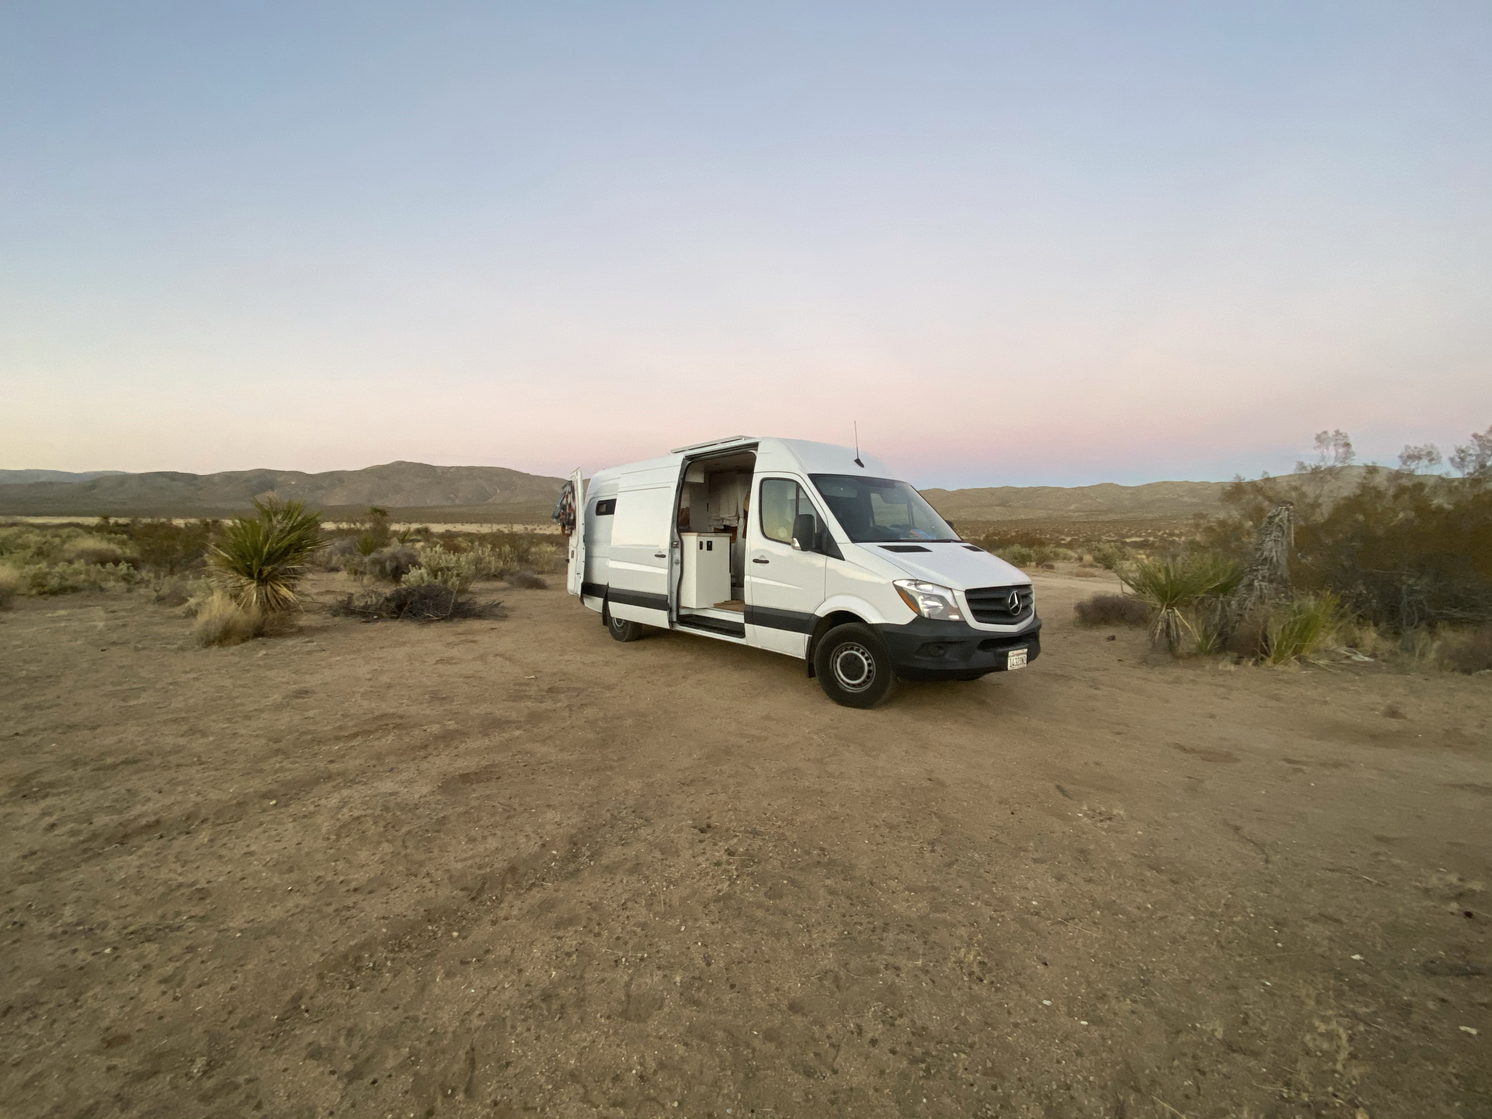 A white van sits in the middle of a desert in early evening.